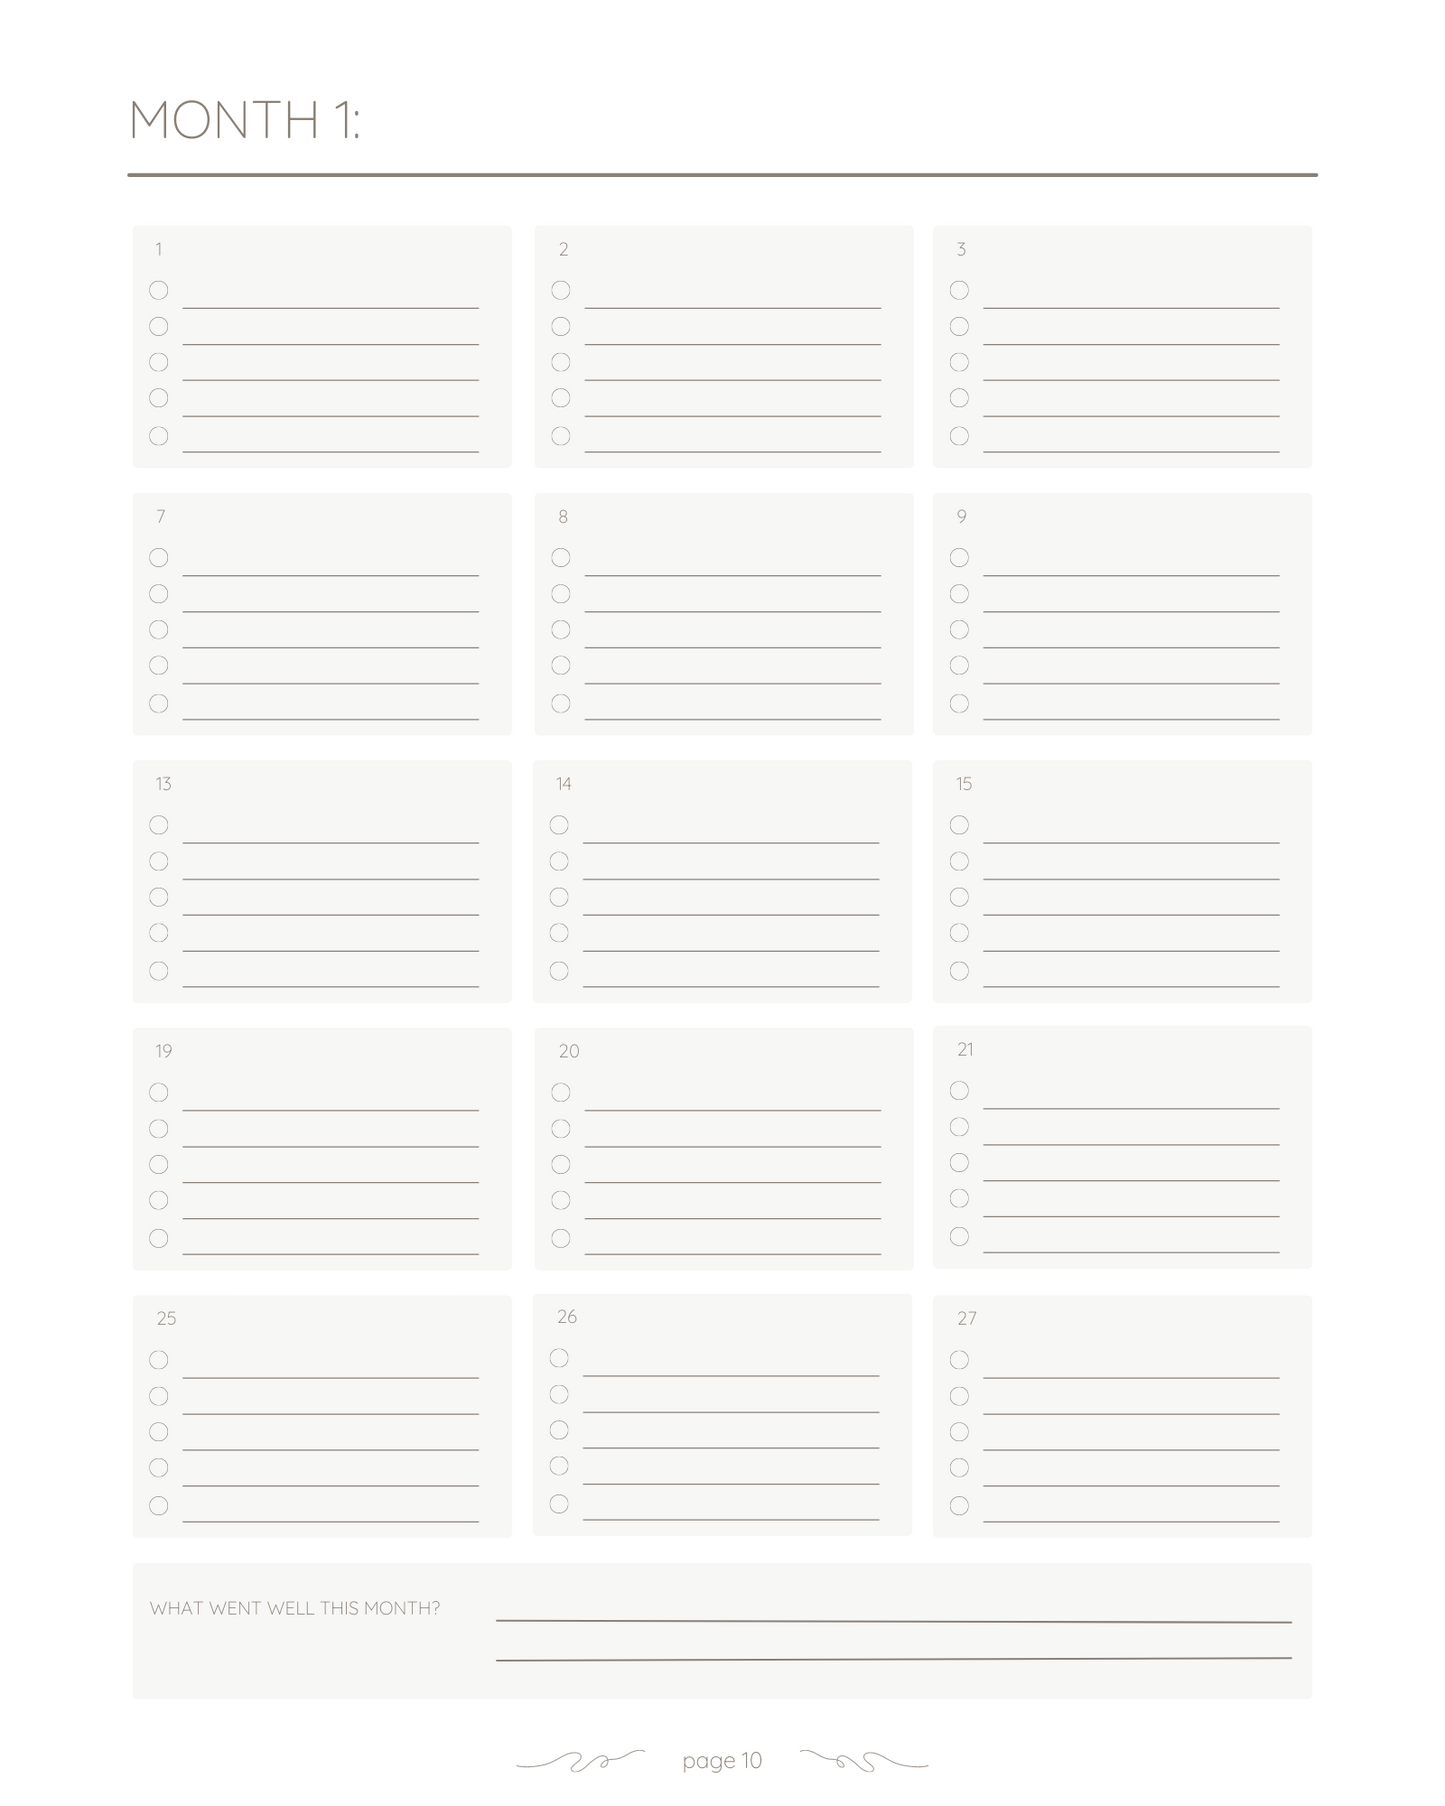 Self-Published Author 52-Week Planner (Physical Version)